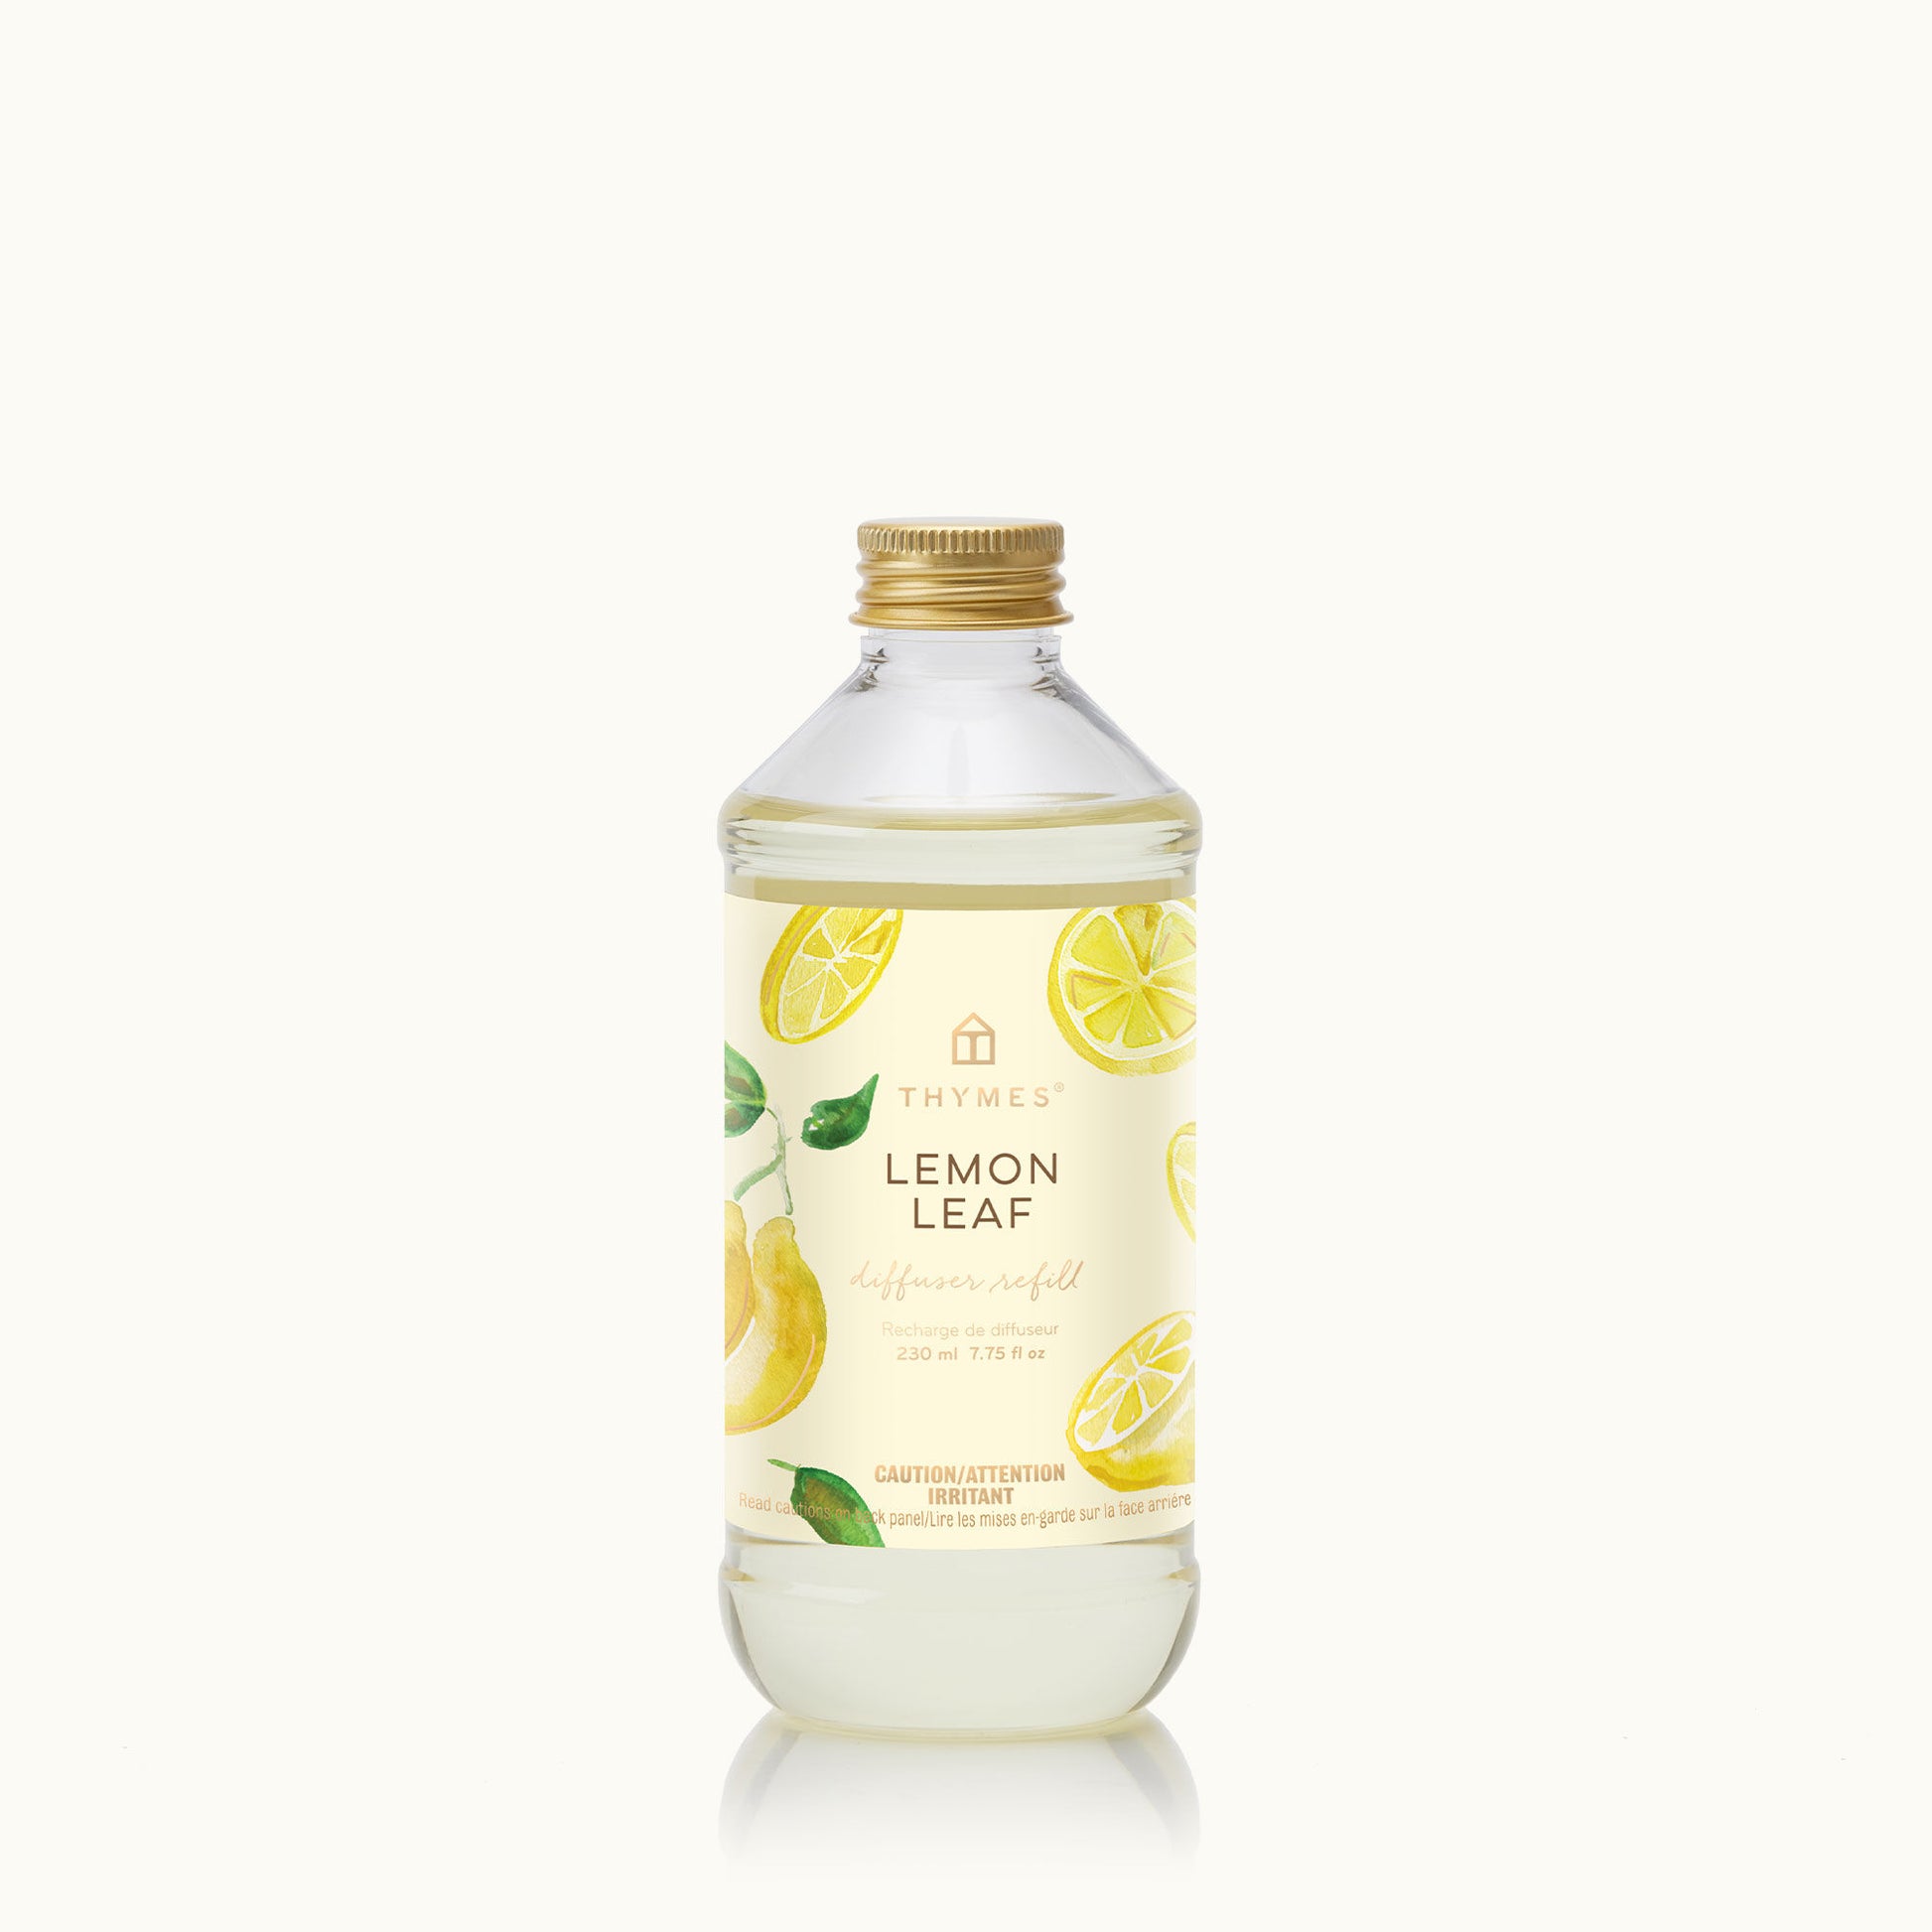 Lemon Leaf Diffuser Oil Refill Gifts Thymes   